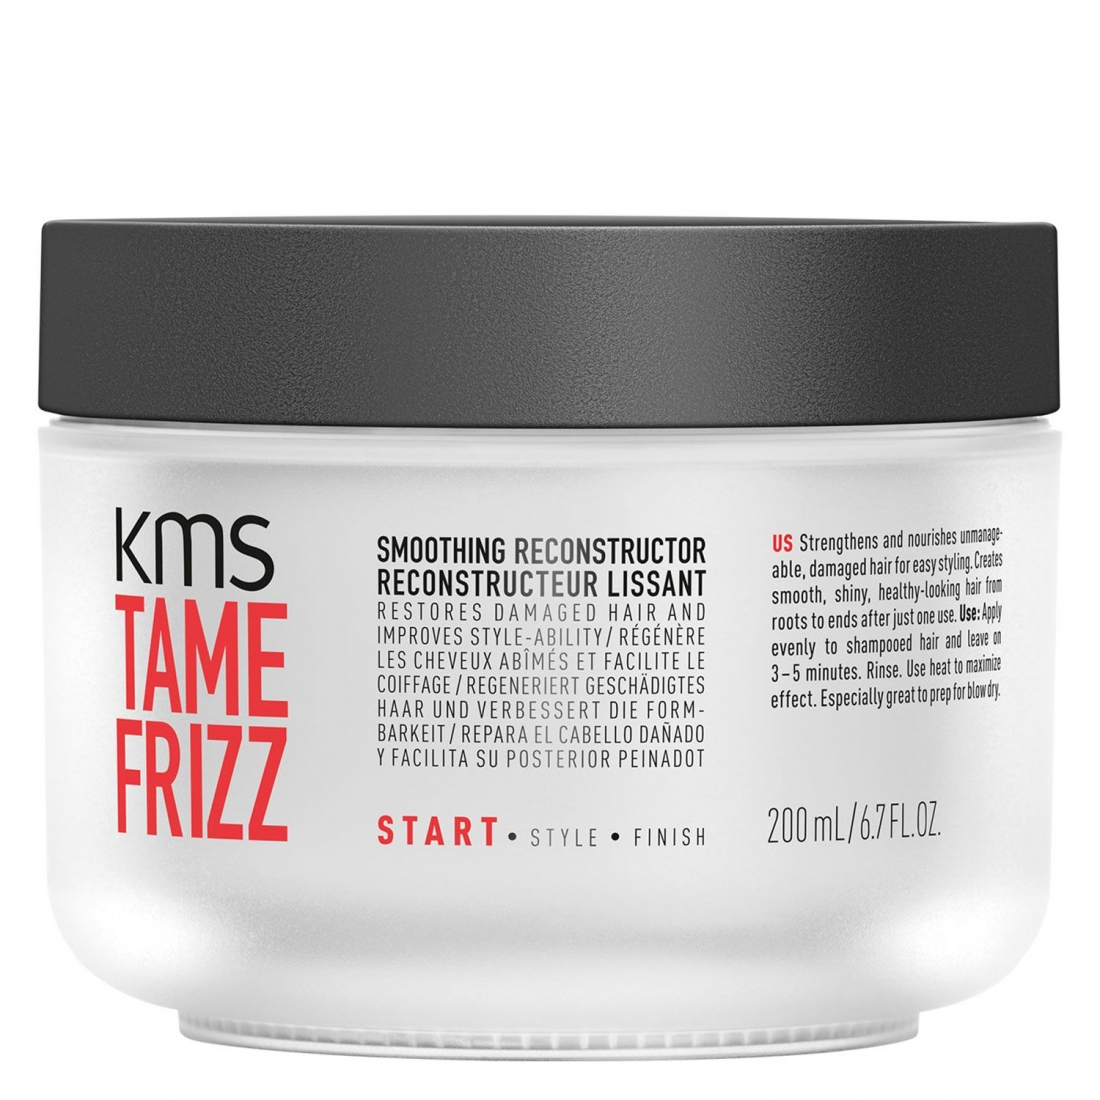 'Tamefrizz - Smoothing Reconstructor' Styling Cream - 200 ml